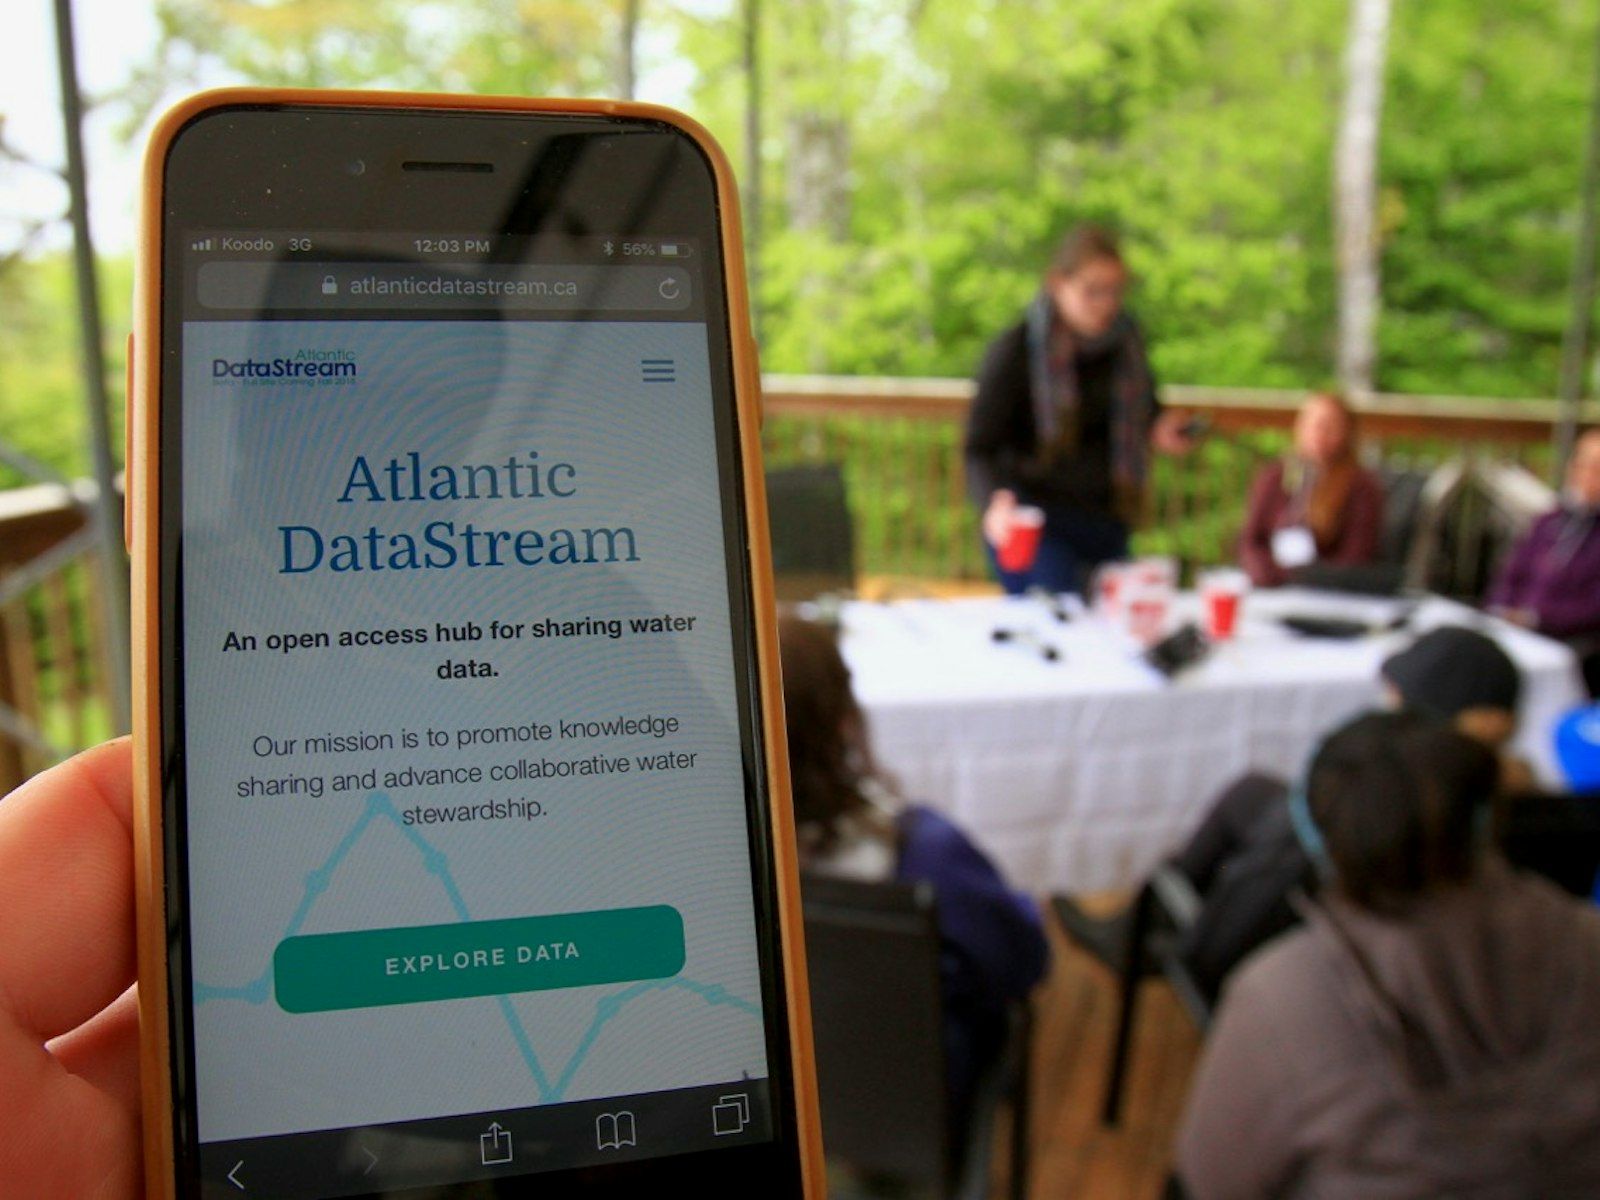 Iphone displaying the Atlantic DataStream homepage with people on a deck around a table in the background